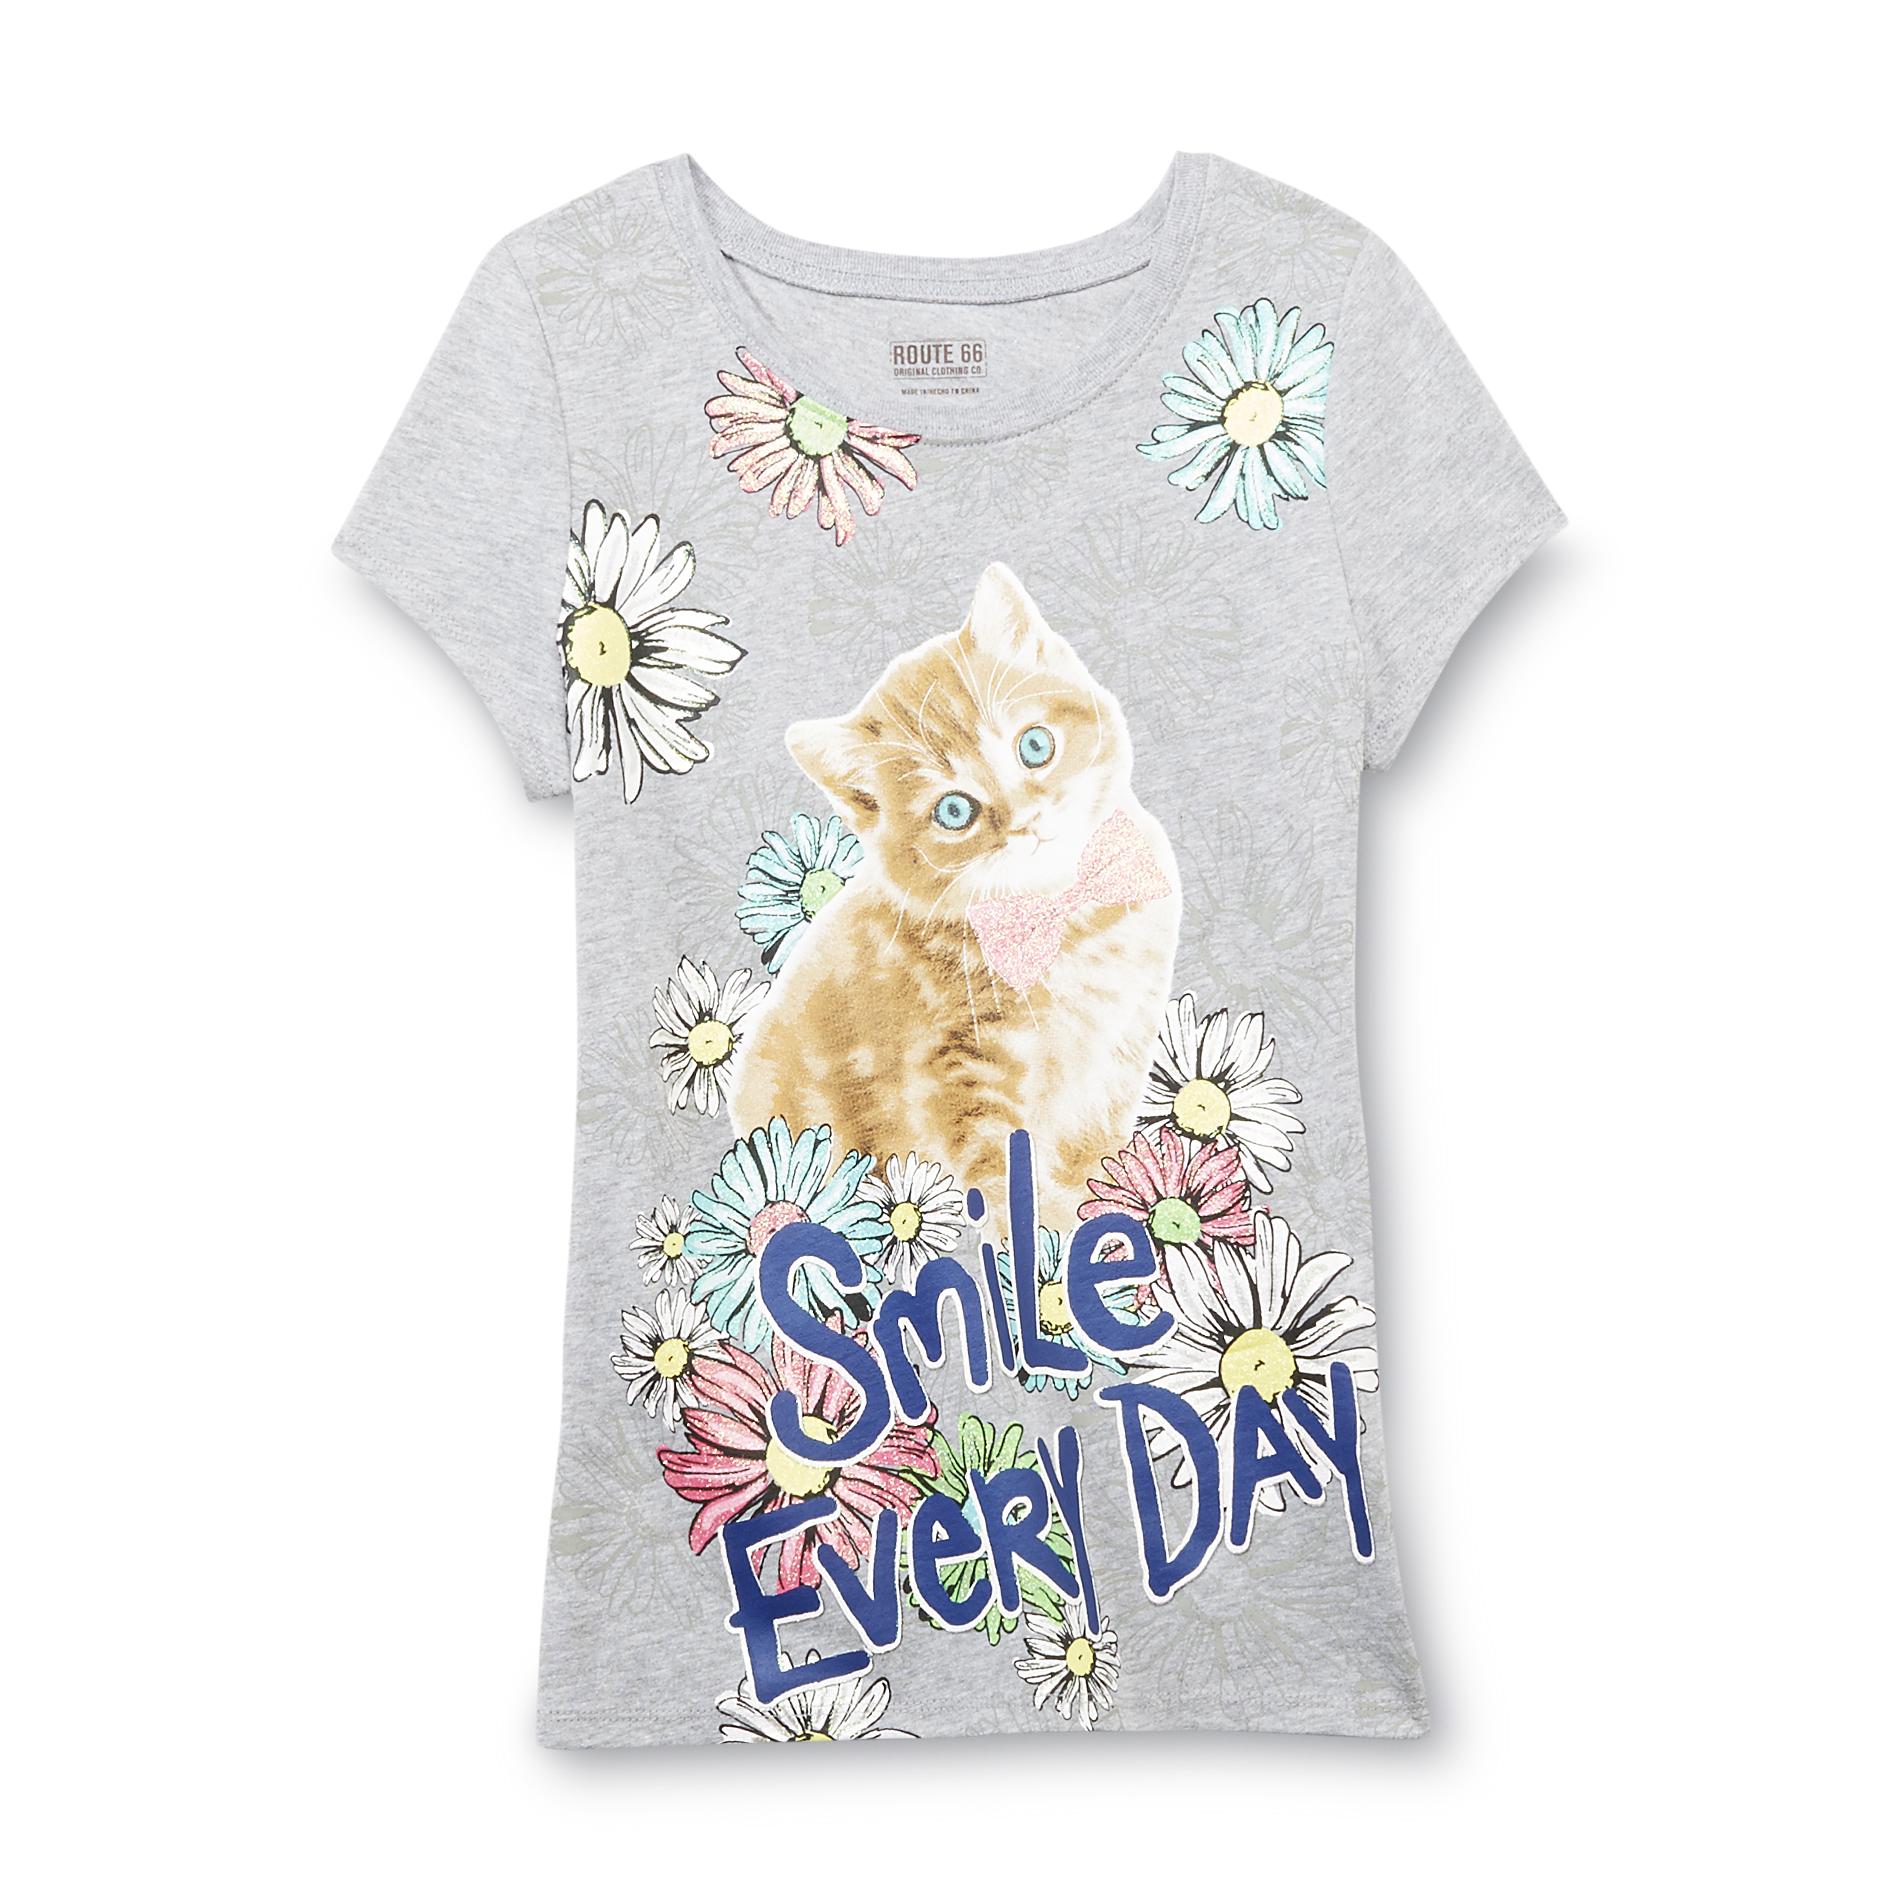 Route 66 Girl's Graphic T-Shirt - Smile Every Day